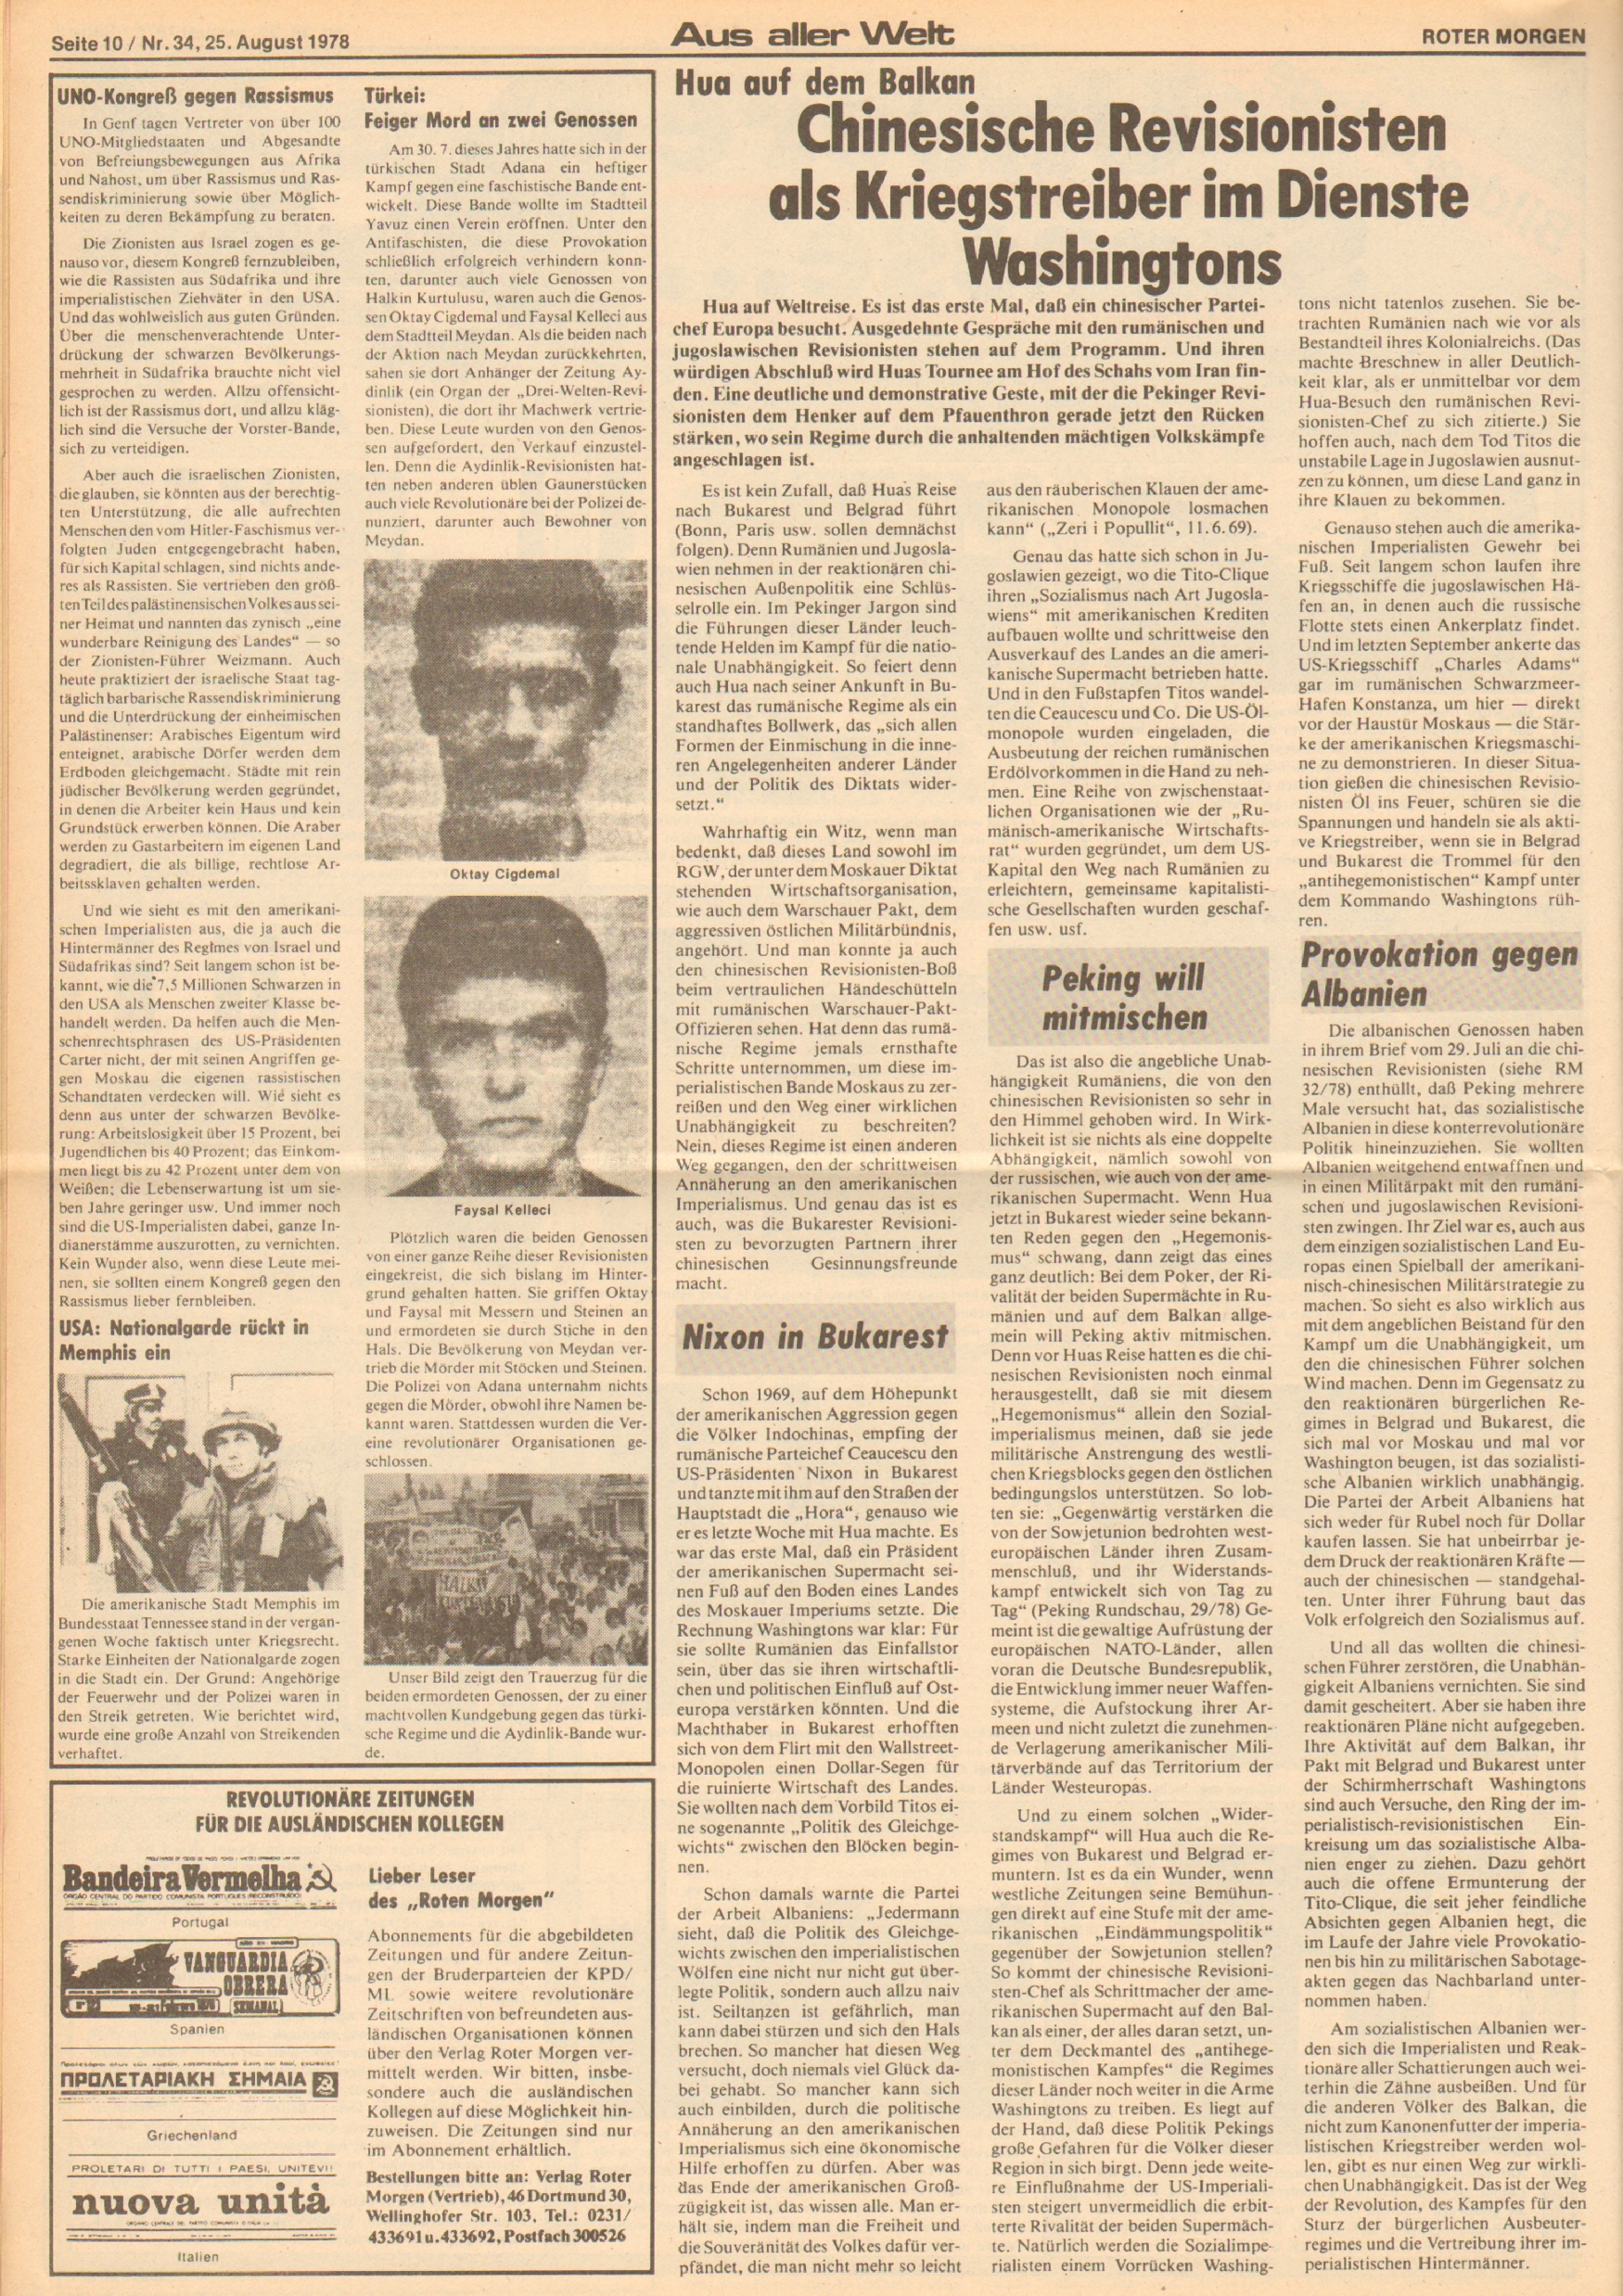 Roter Morgen, 12. Jg., 25. August 1978, Nr. 34, Seite 10